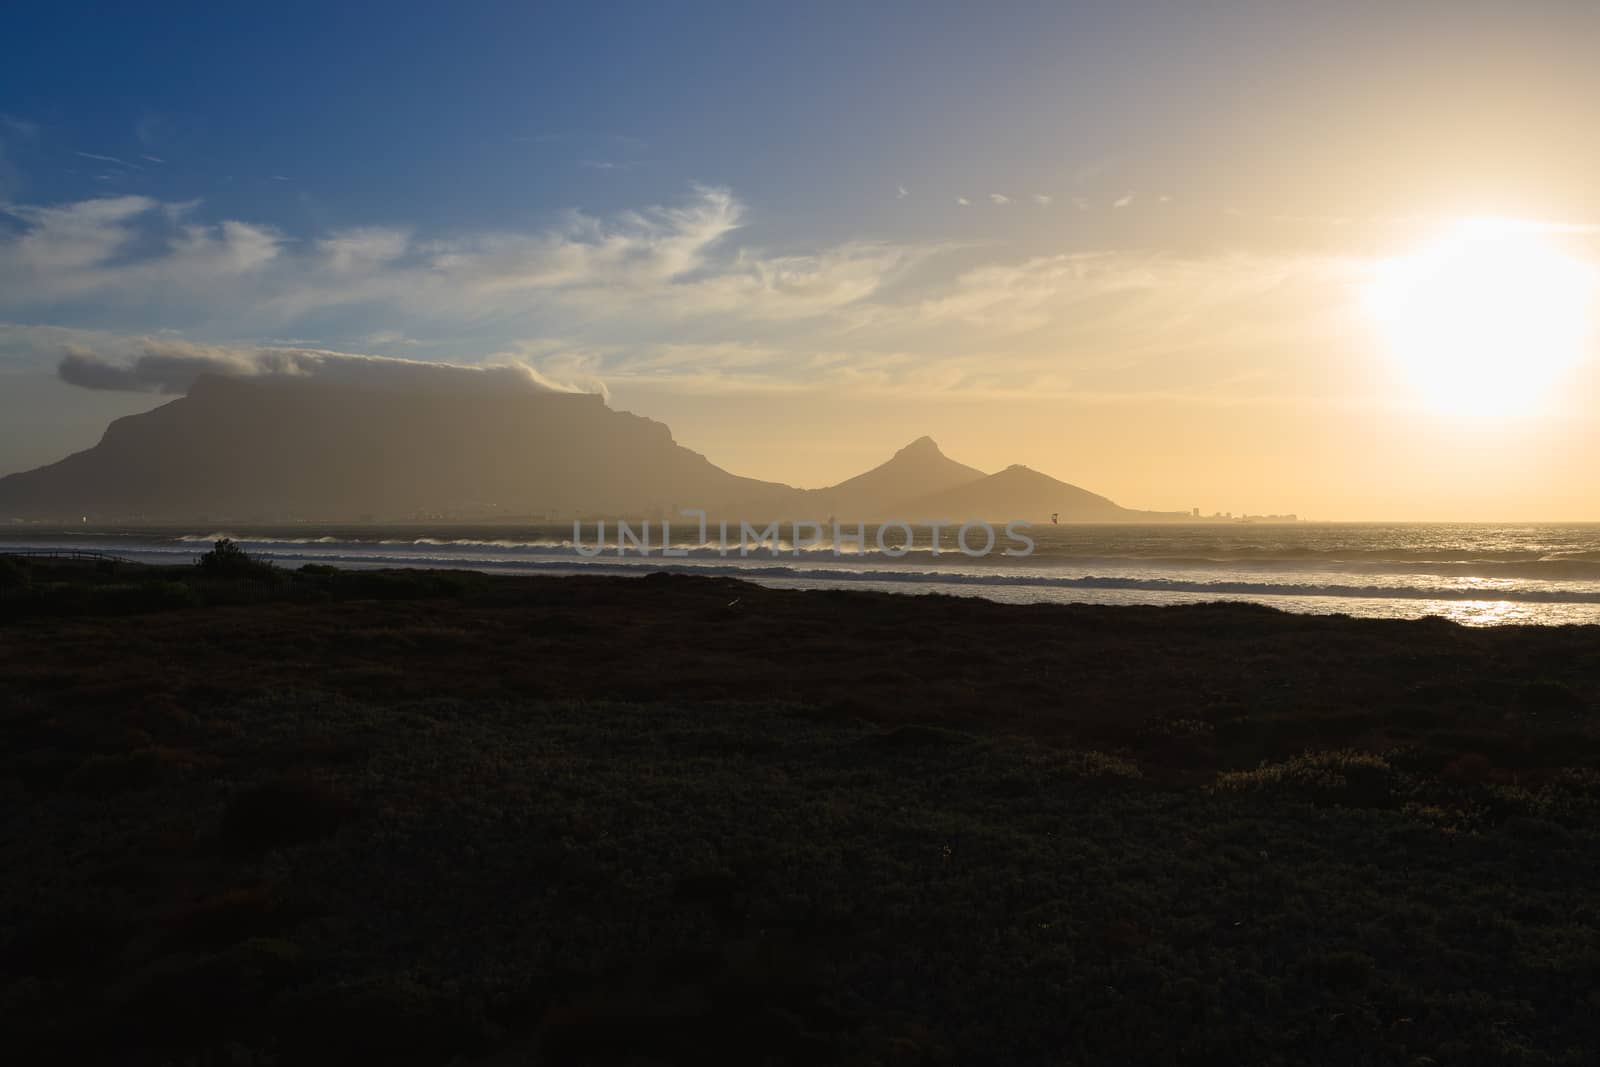 A view of the Table Mountain, Cape town